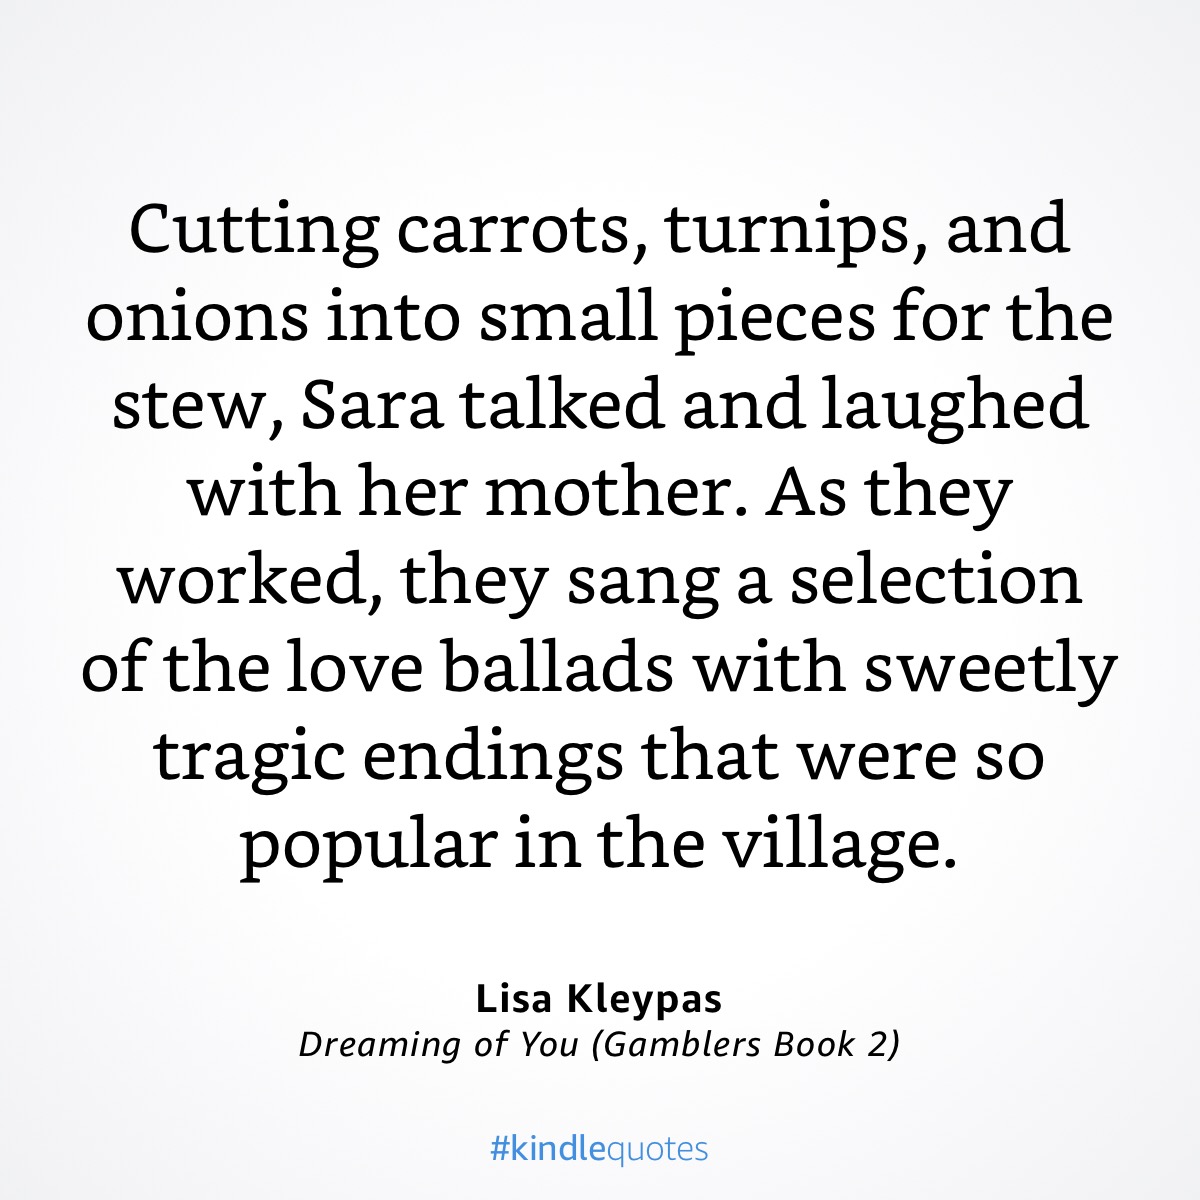 Lisa Kleypas is seriously the turnip queen, I adore her. Turnips and sweetly tragic endings!